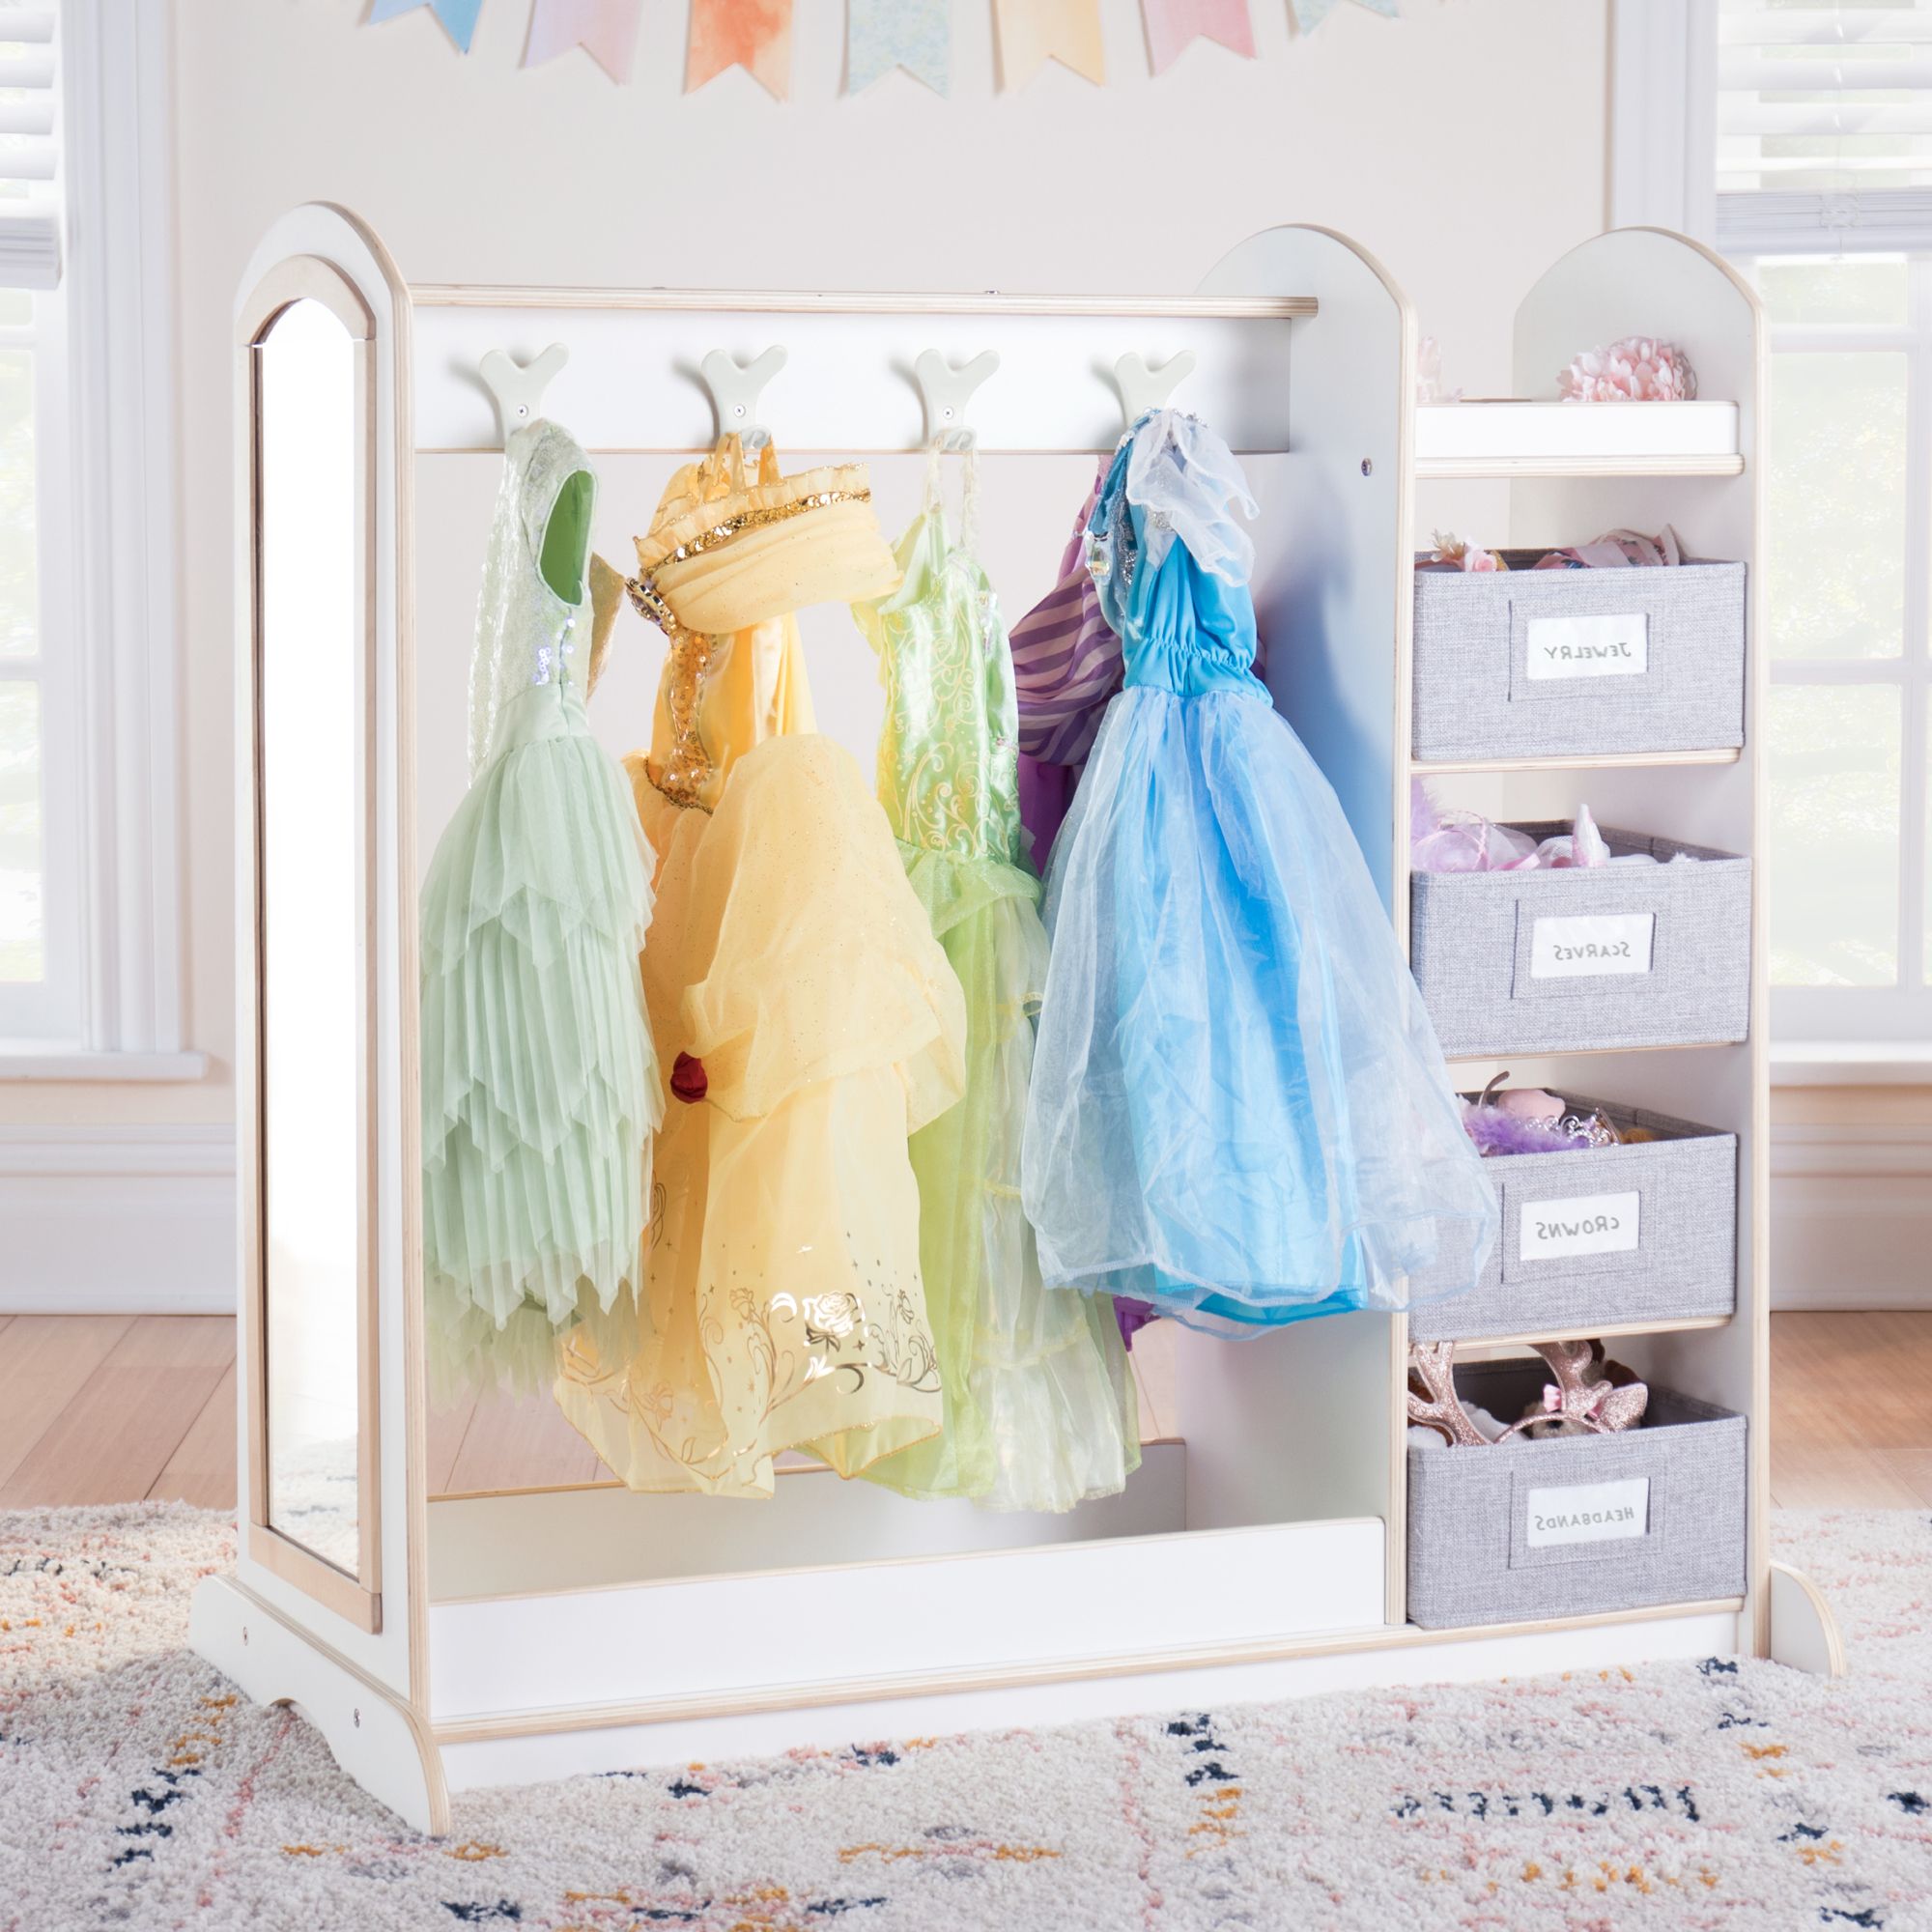 Edq Dress Up Storage With Bins  White – Guidecraft Kids' Furniture And Toys Throughout Kids Dress Up Wardrobes Closet (View 6 of 20)